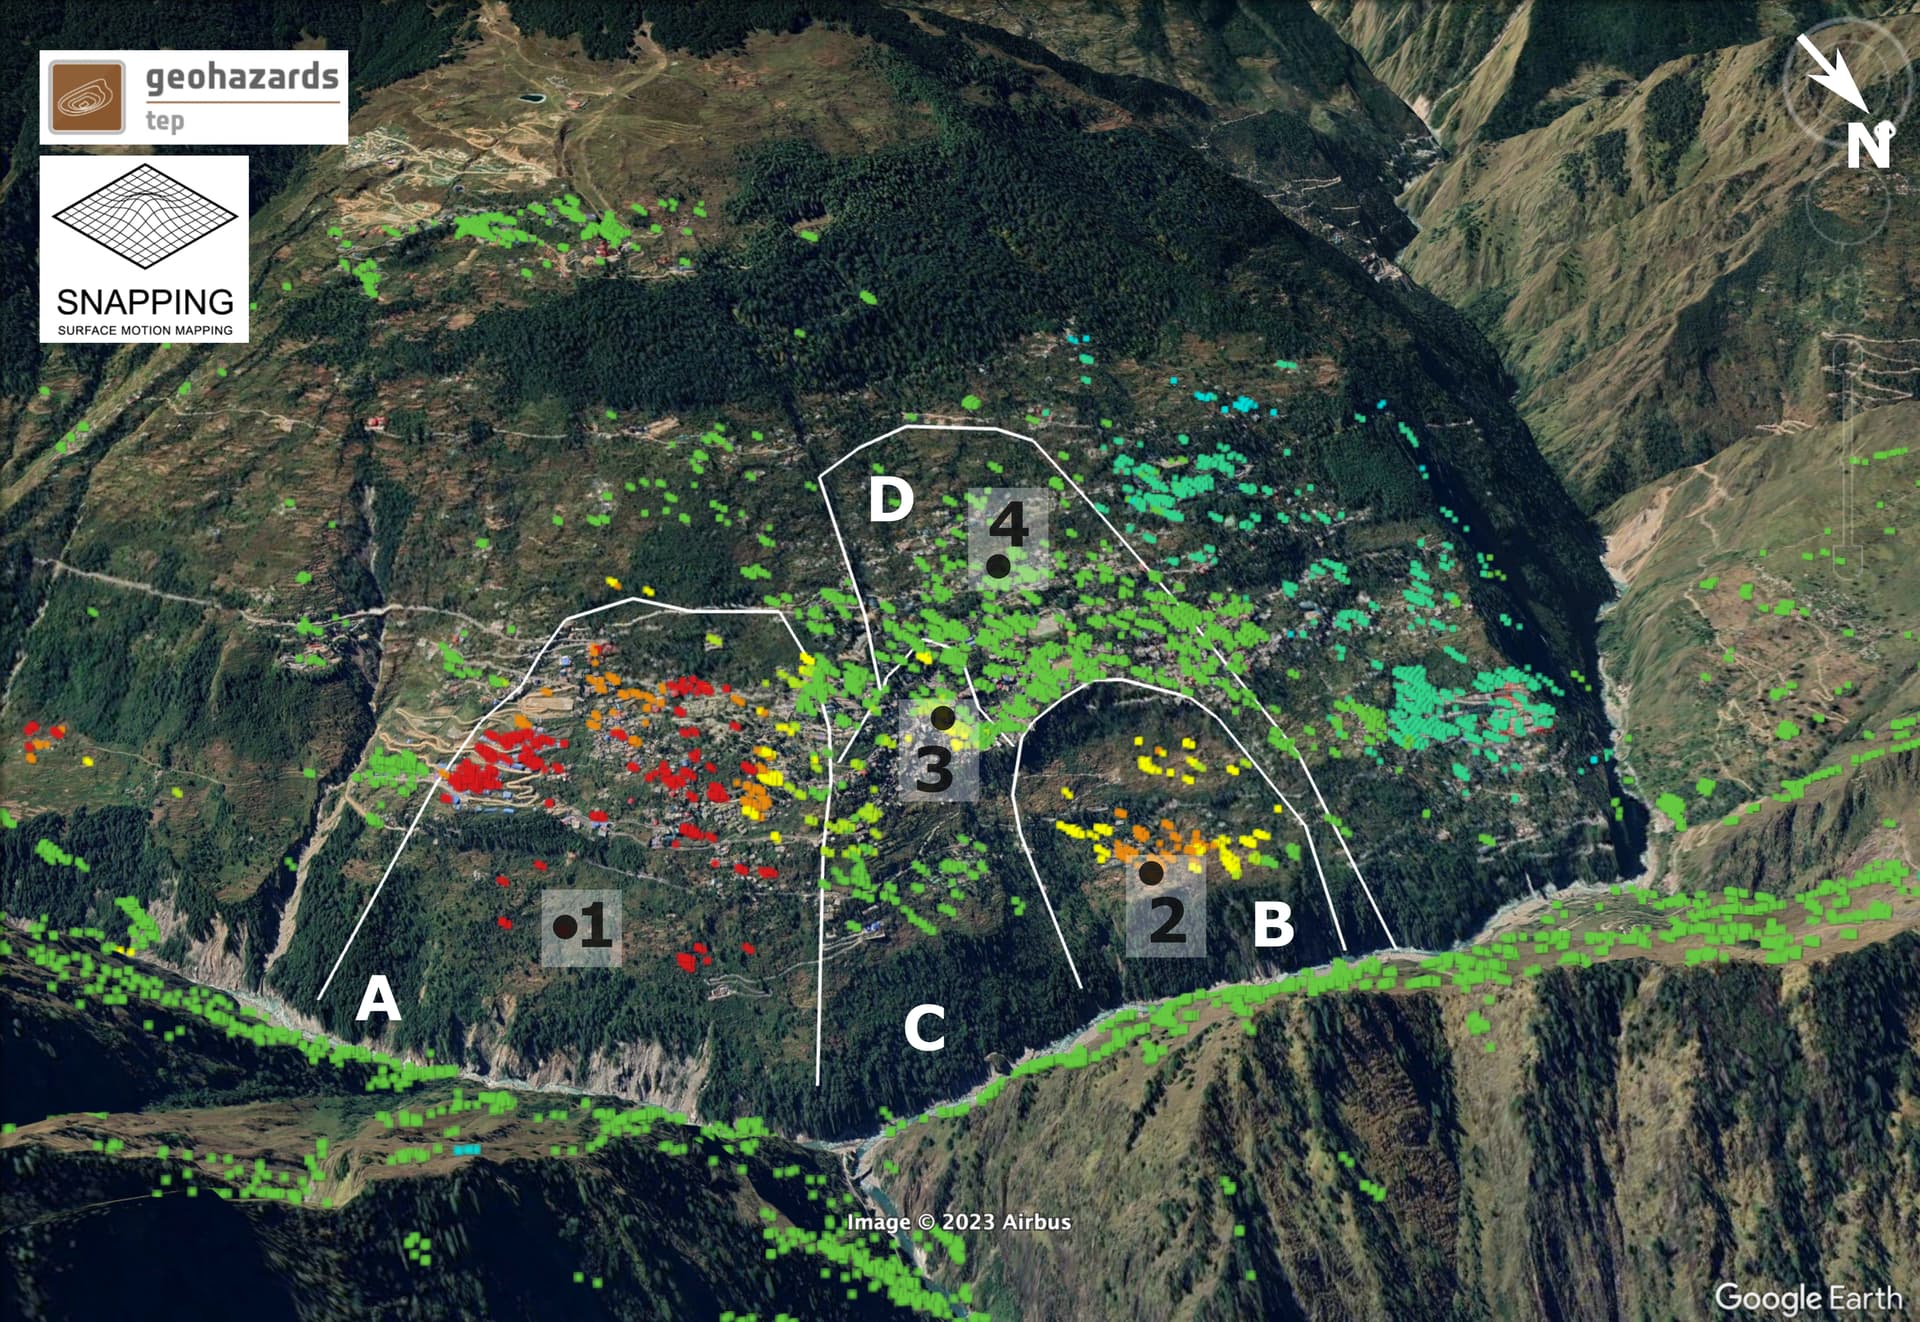 3-Dimensional view of the Joshimath slope with the SNAPPING Full Resolution PSI results overlaid (background Google Earth). The location of the active units (A, B, C, D) are delimited by white lines. The location of selected PSI targets 1, 2, 3 and 4 are also indicated. 